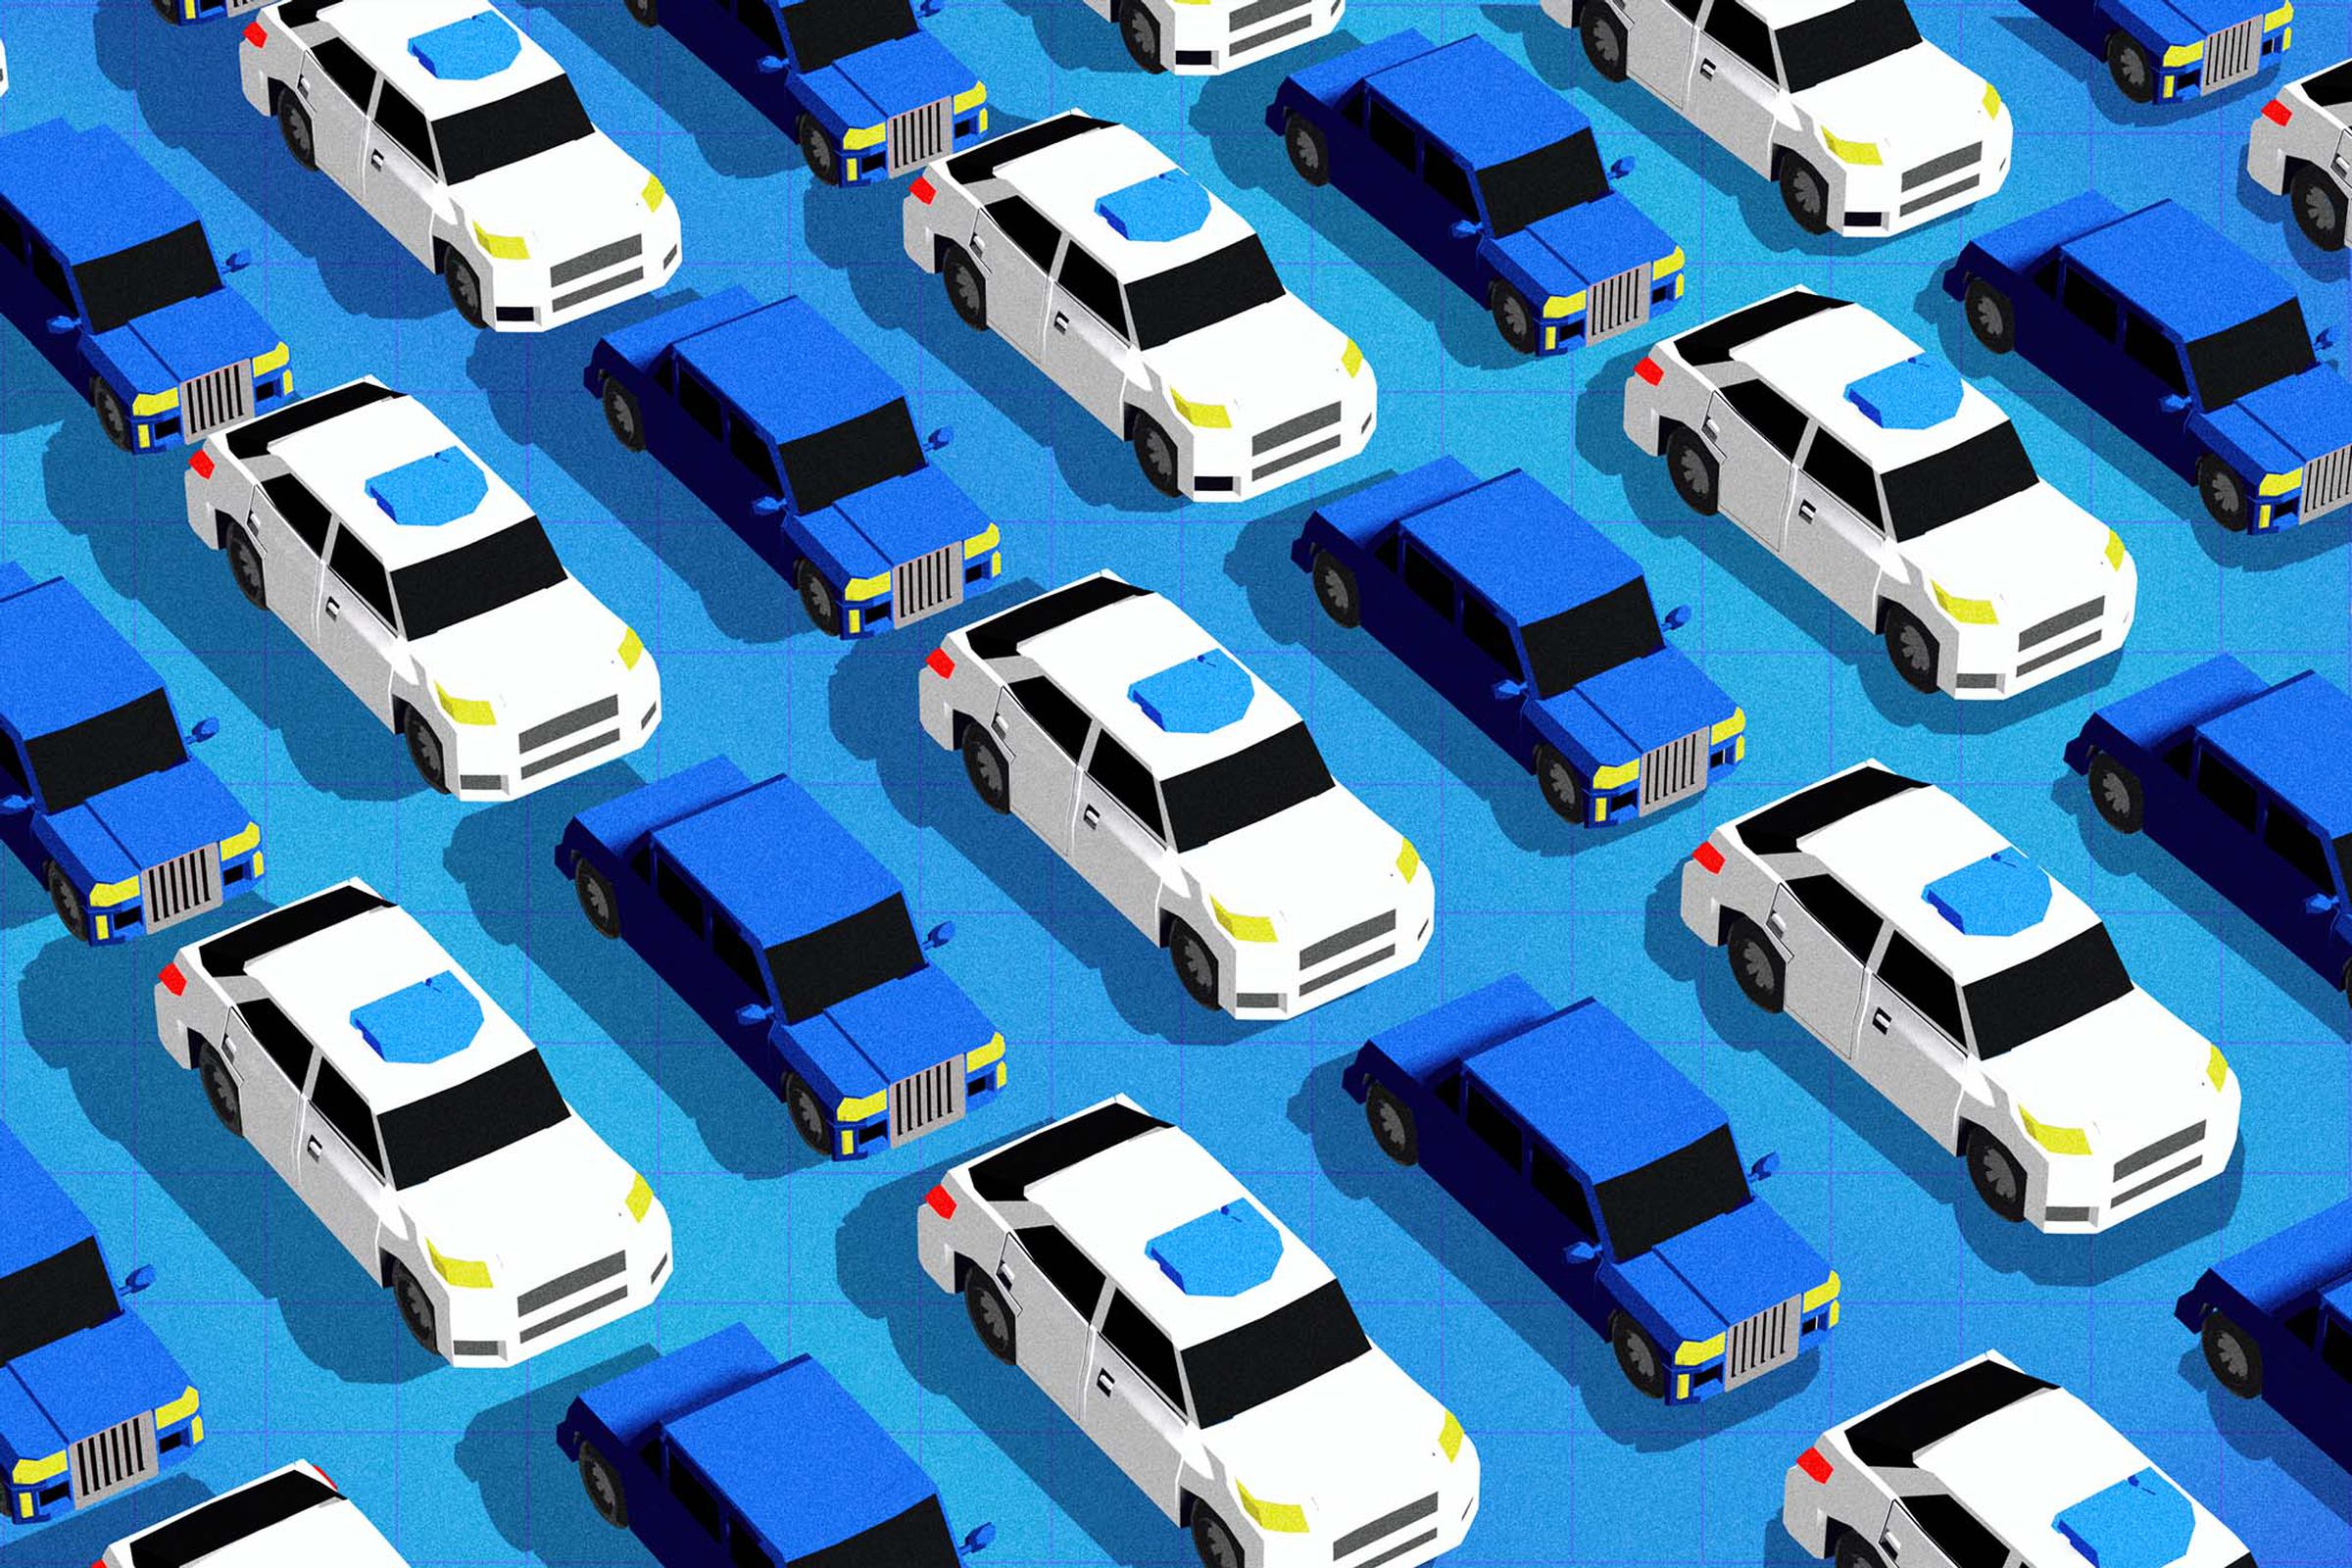 An illustration of alternating blue and white vehicles over a blue background